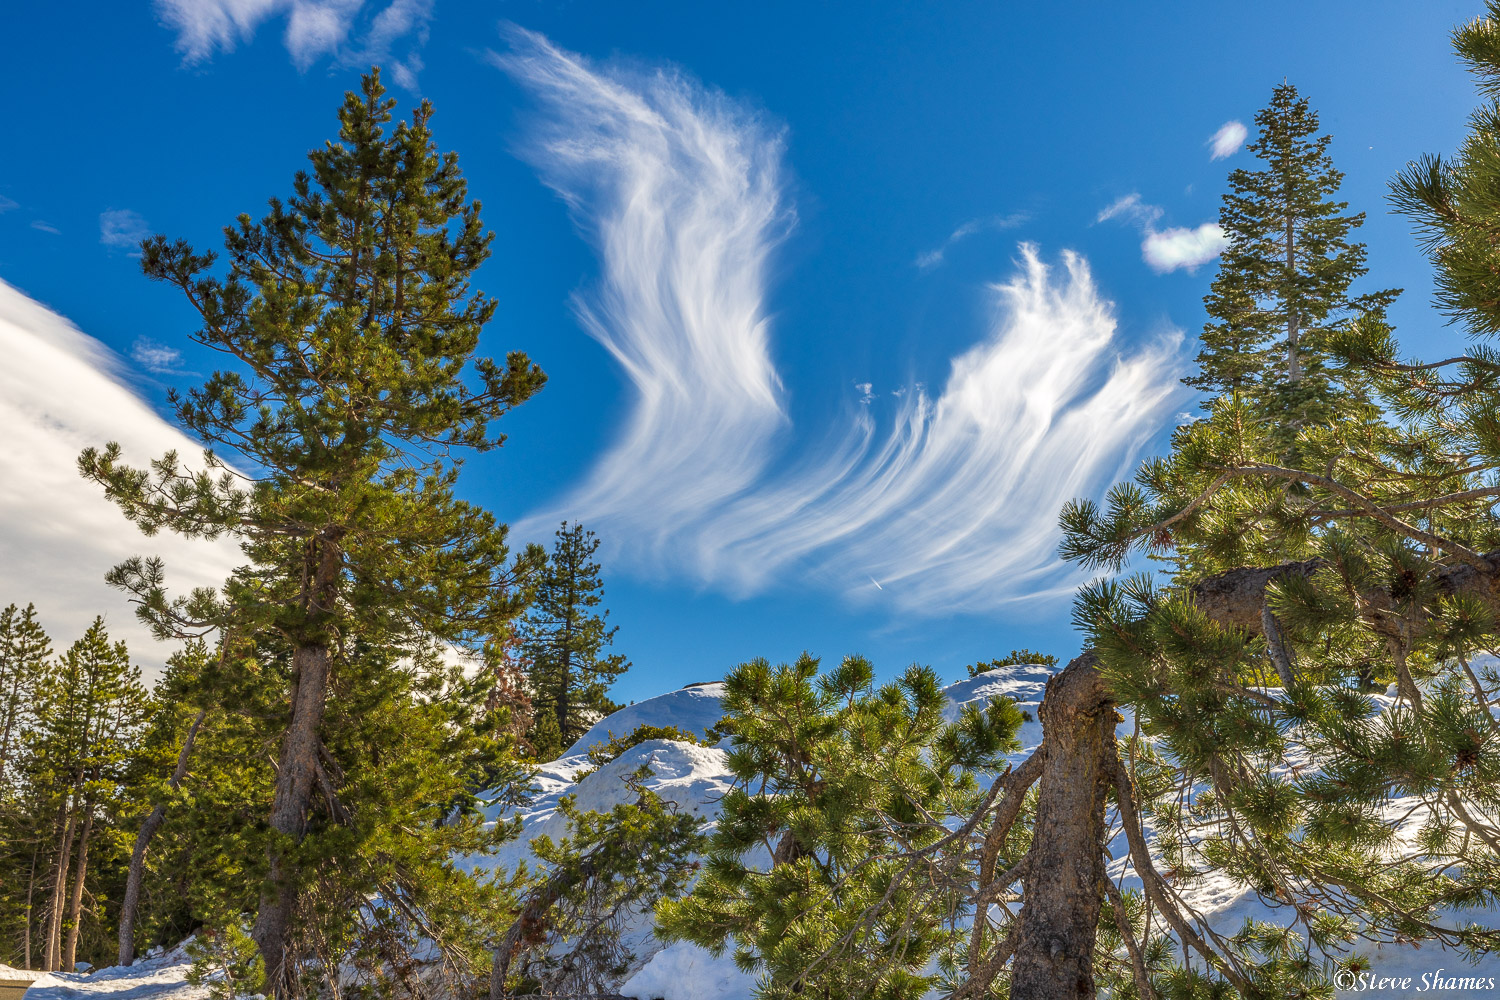 Great wispy clouds here in the mountains.